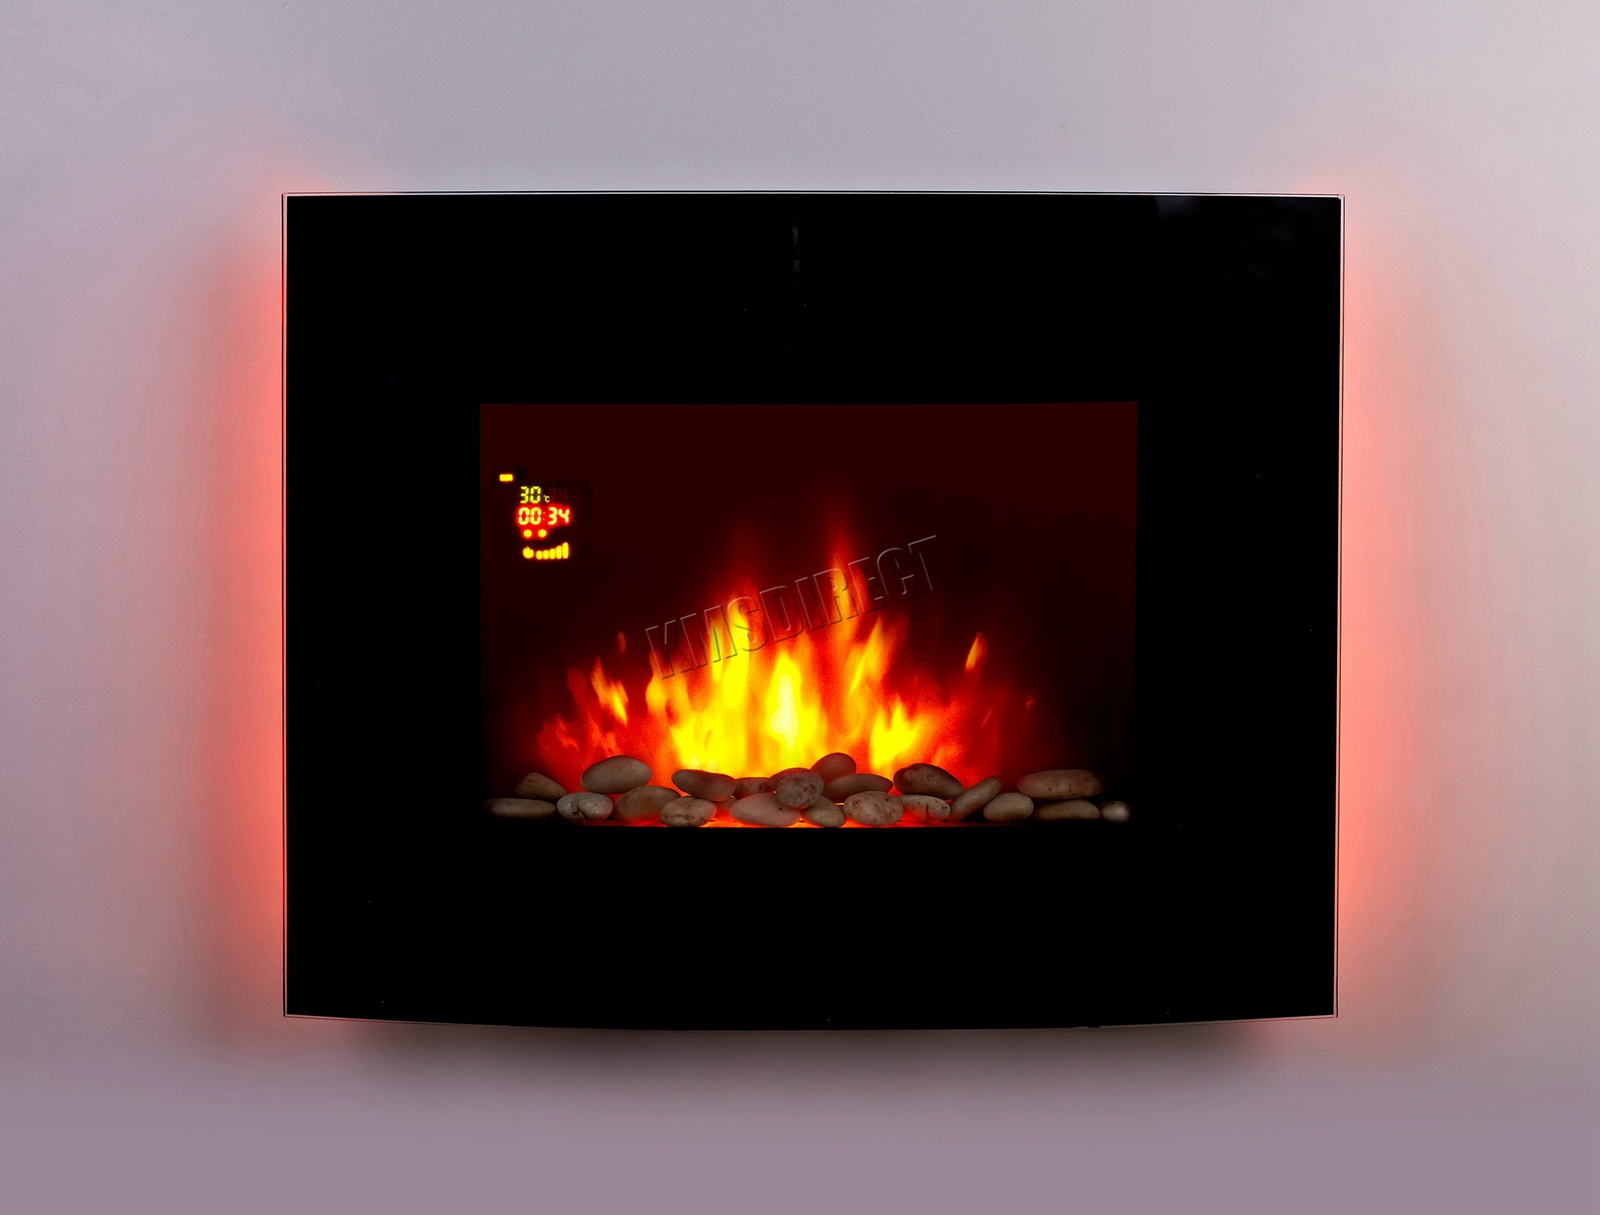 Electric Wall Fireplace Heater Fresh Details About Wall Mounted Electric Fireplace Glass Heater Fire Remote Control Led Backlit New